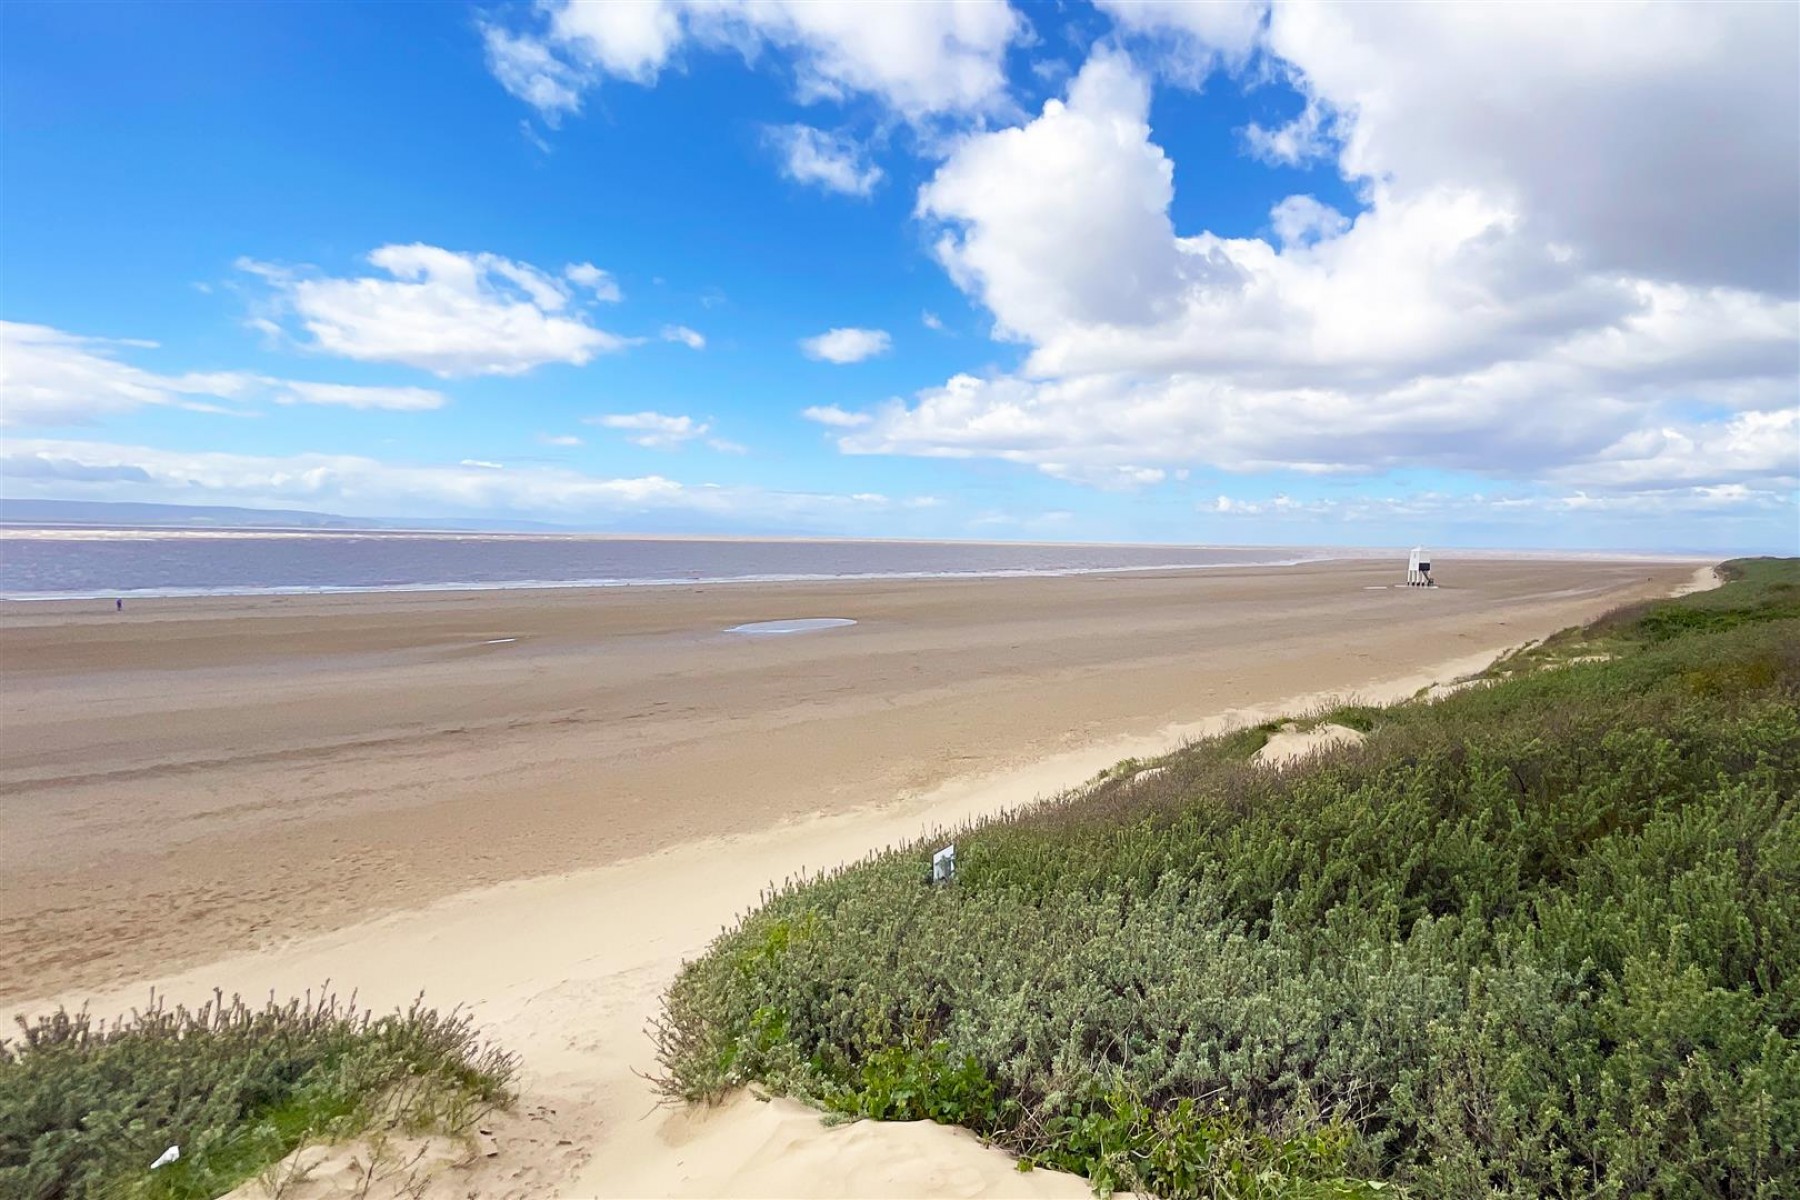 Images for DETACHED HOME | BURNHAM ON SEA TA8